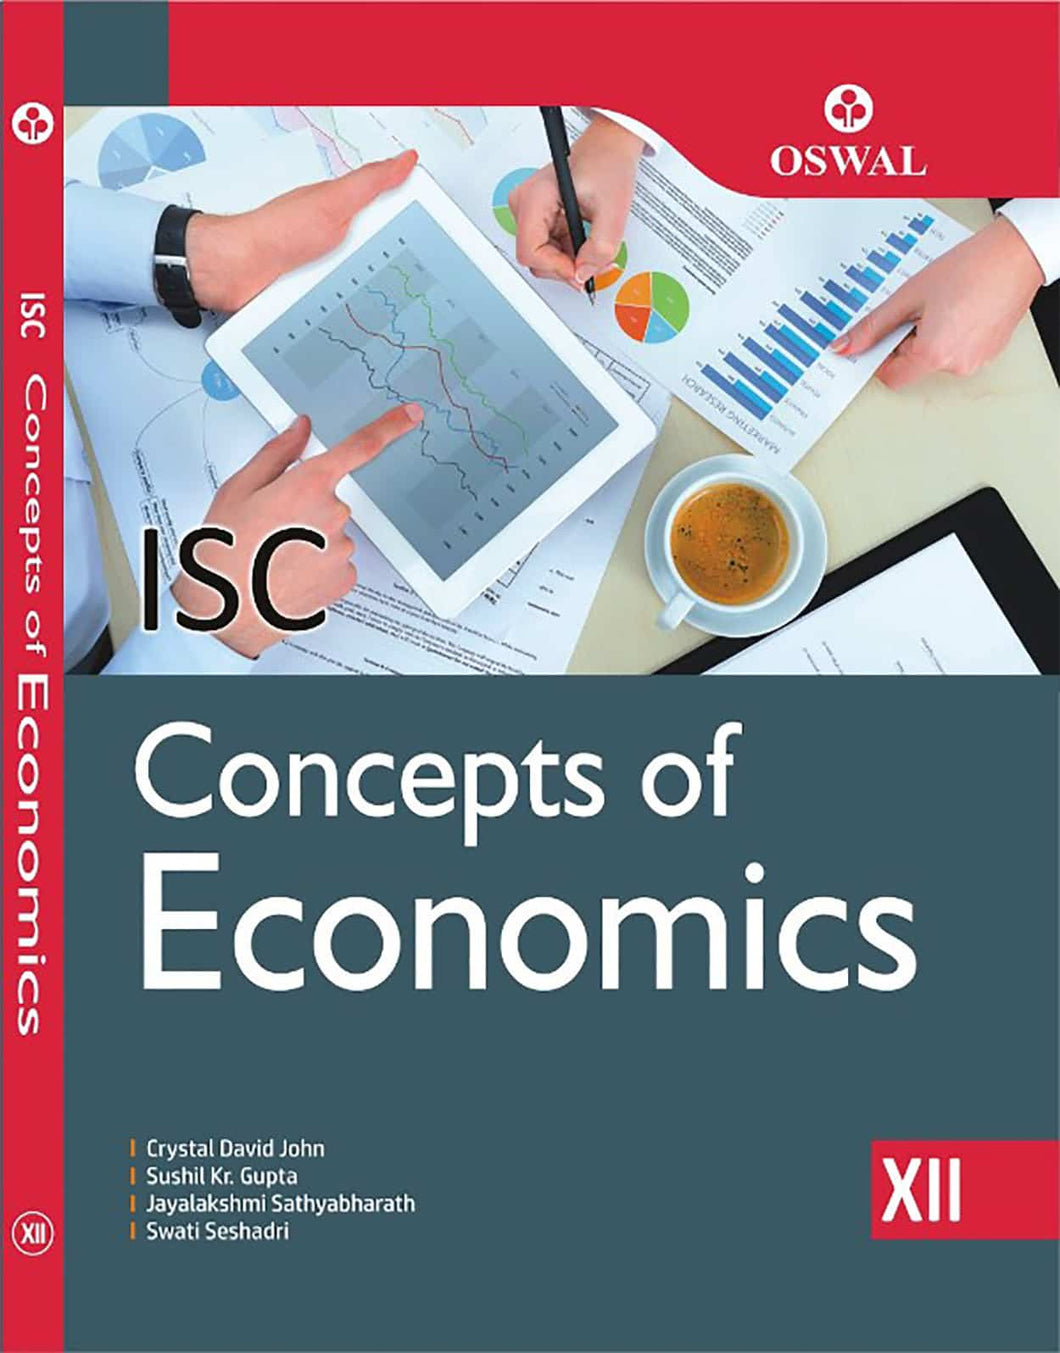 Oswal Concepts of Economics: Textbook for ISC Class 12